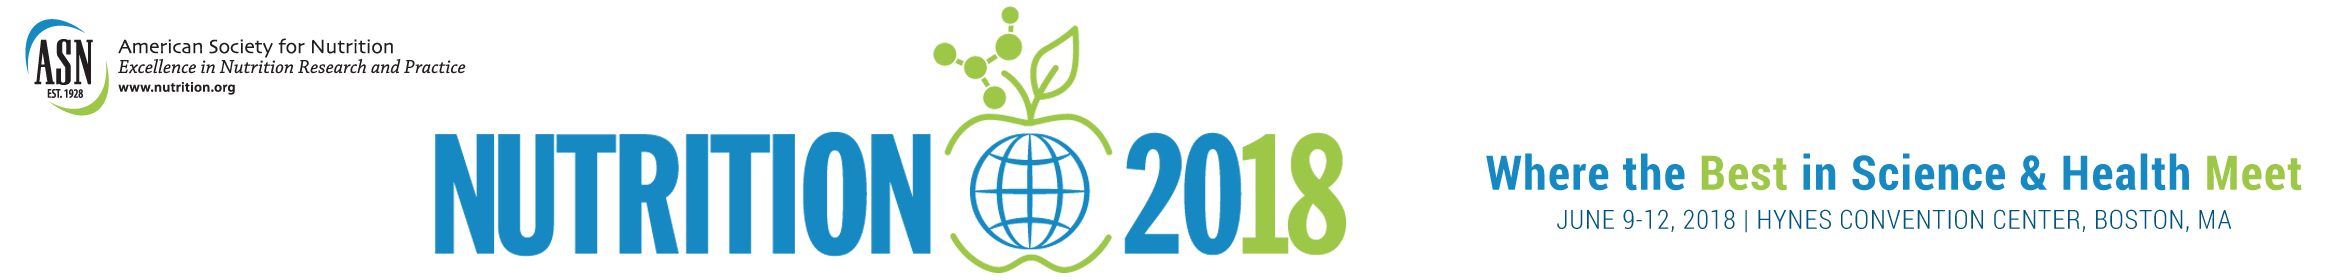 Nutrition 2018 Meeting Main banner